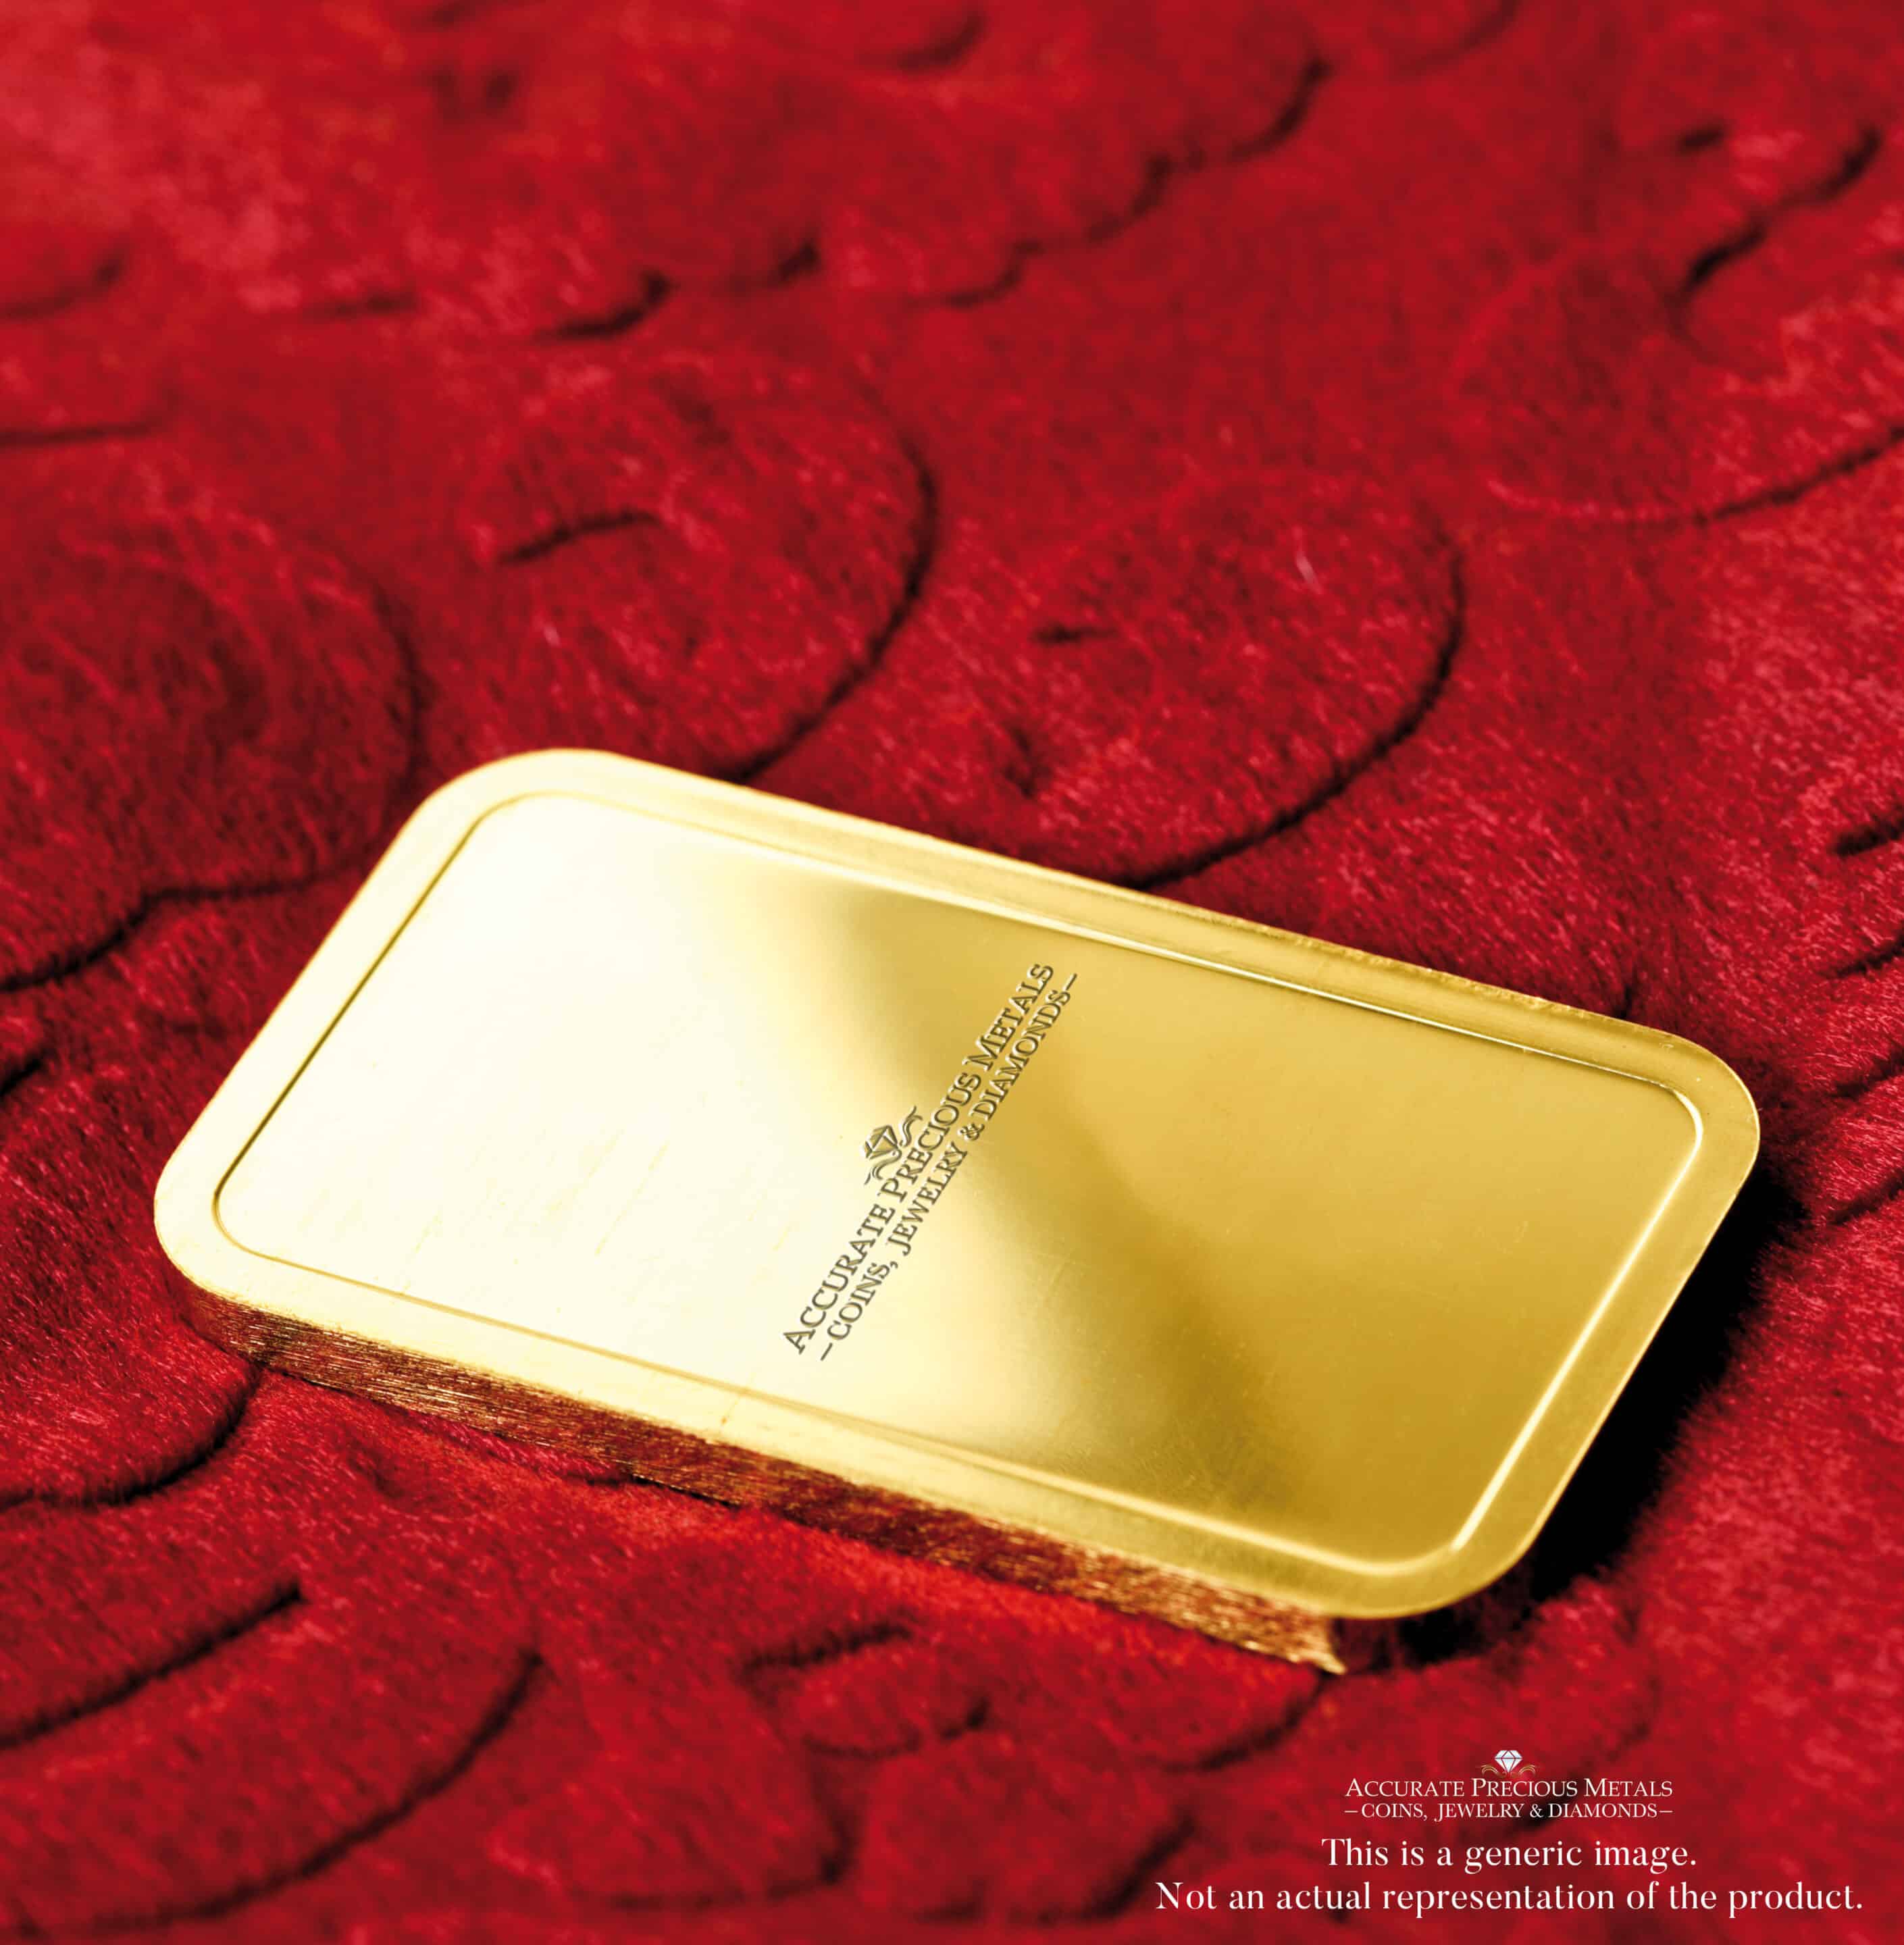 Perth Mint 1/10 oz Gold Bar - Preserve Your Wealth with Precious Metal